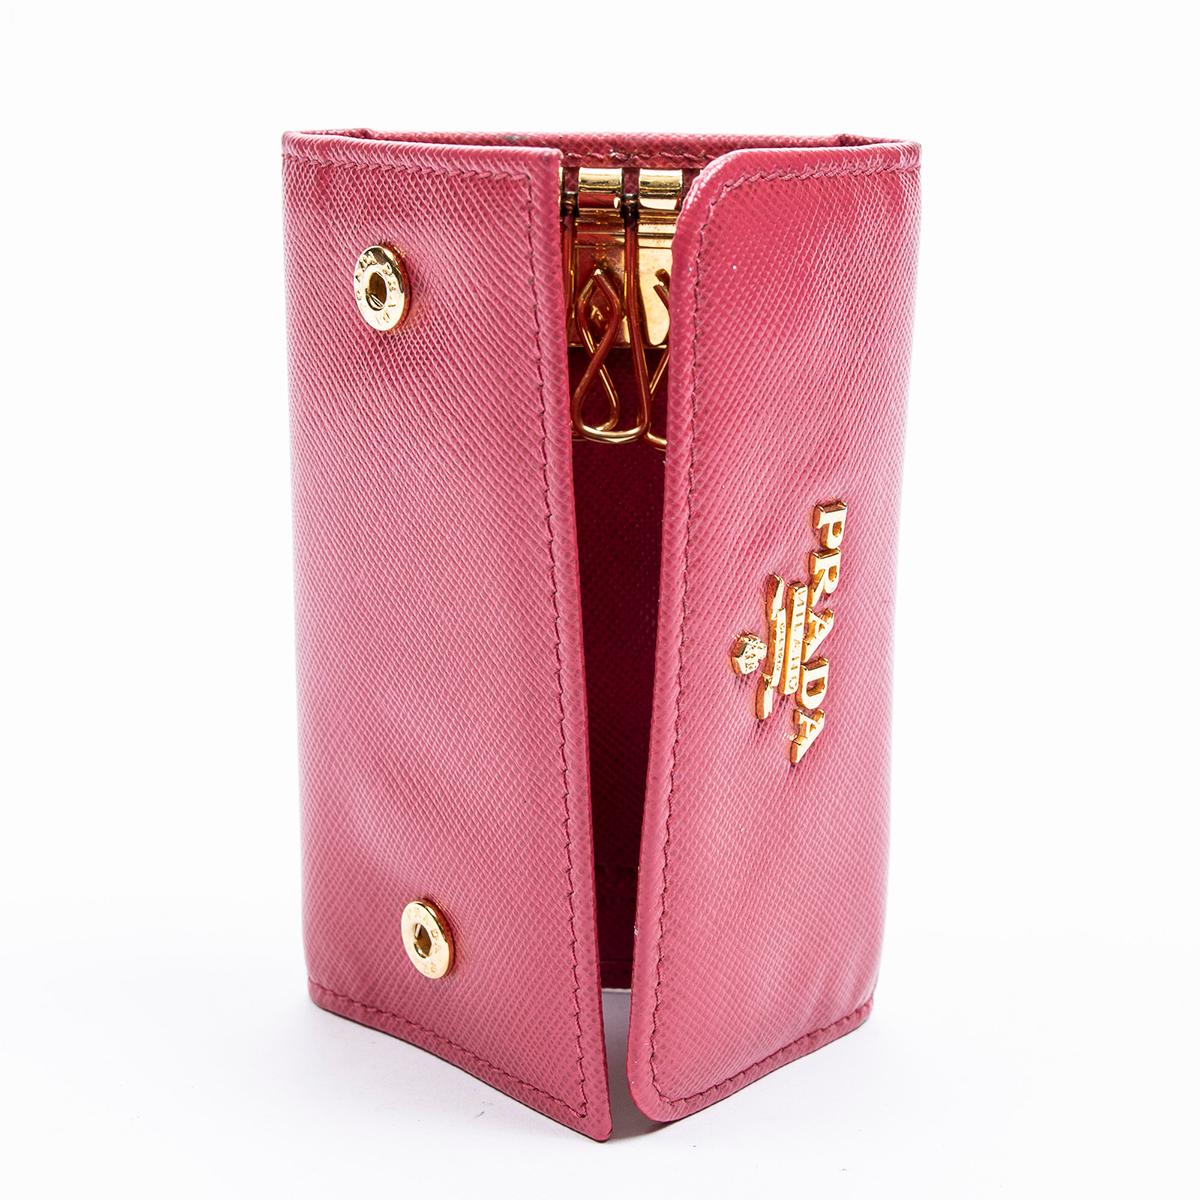 Sold at Auction: Prada - Key Holder Wallet - Pink - Saffiano Leather